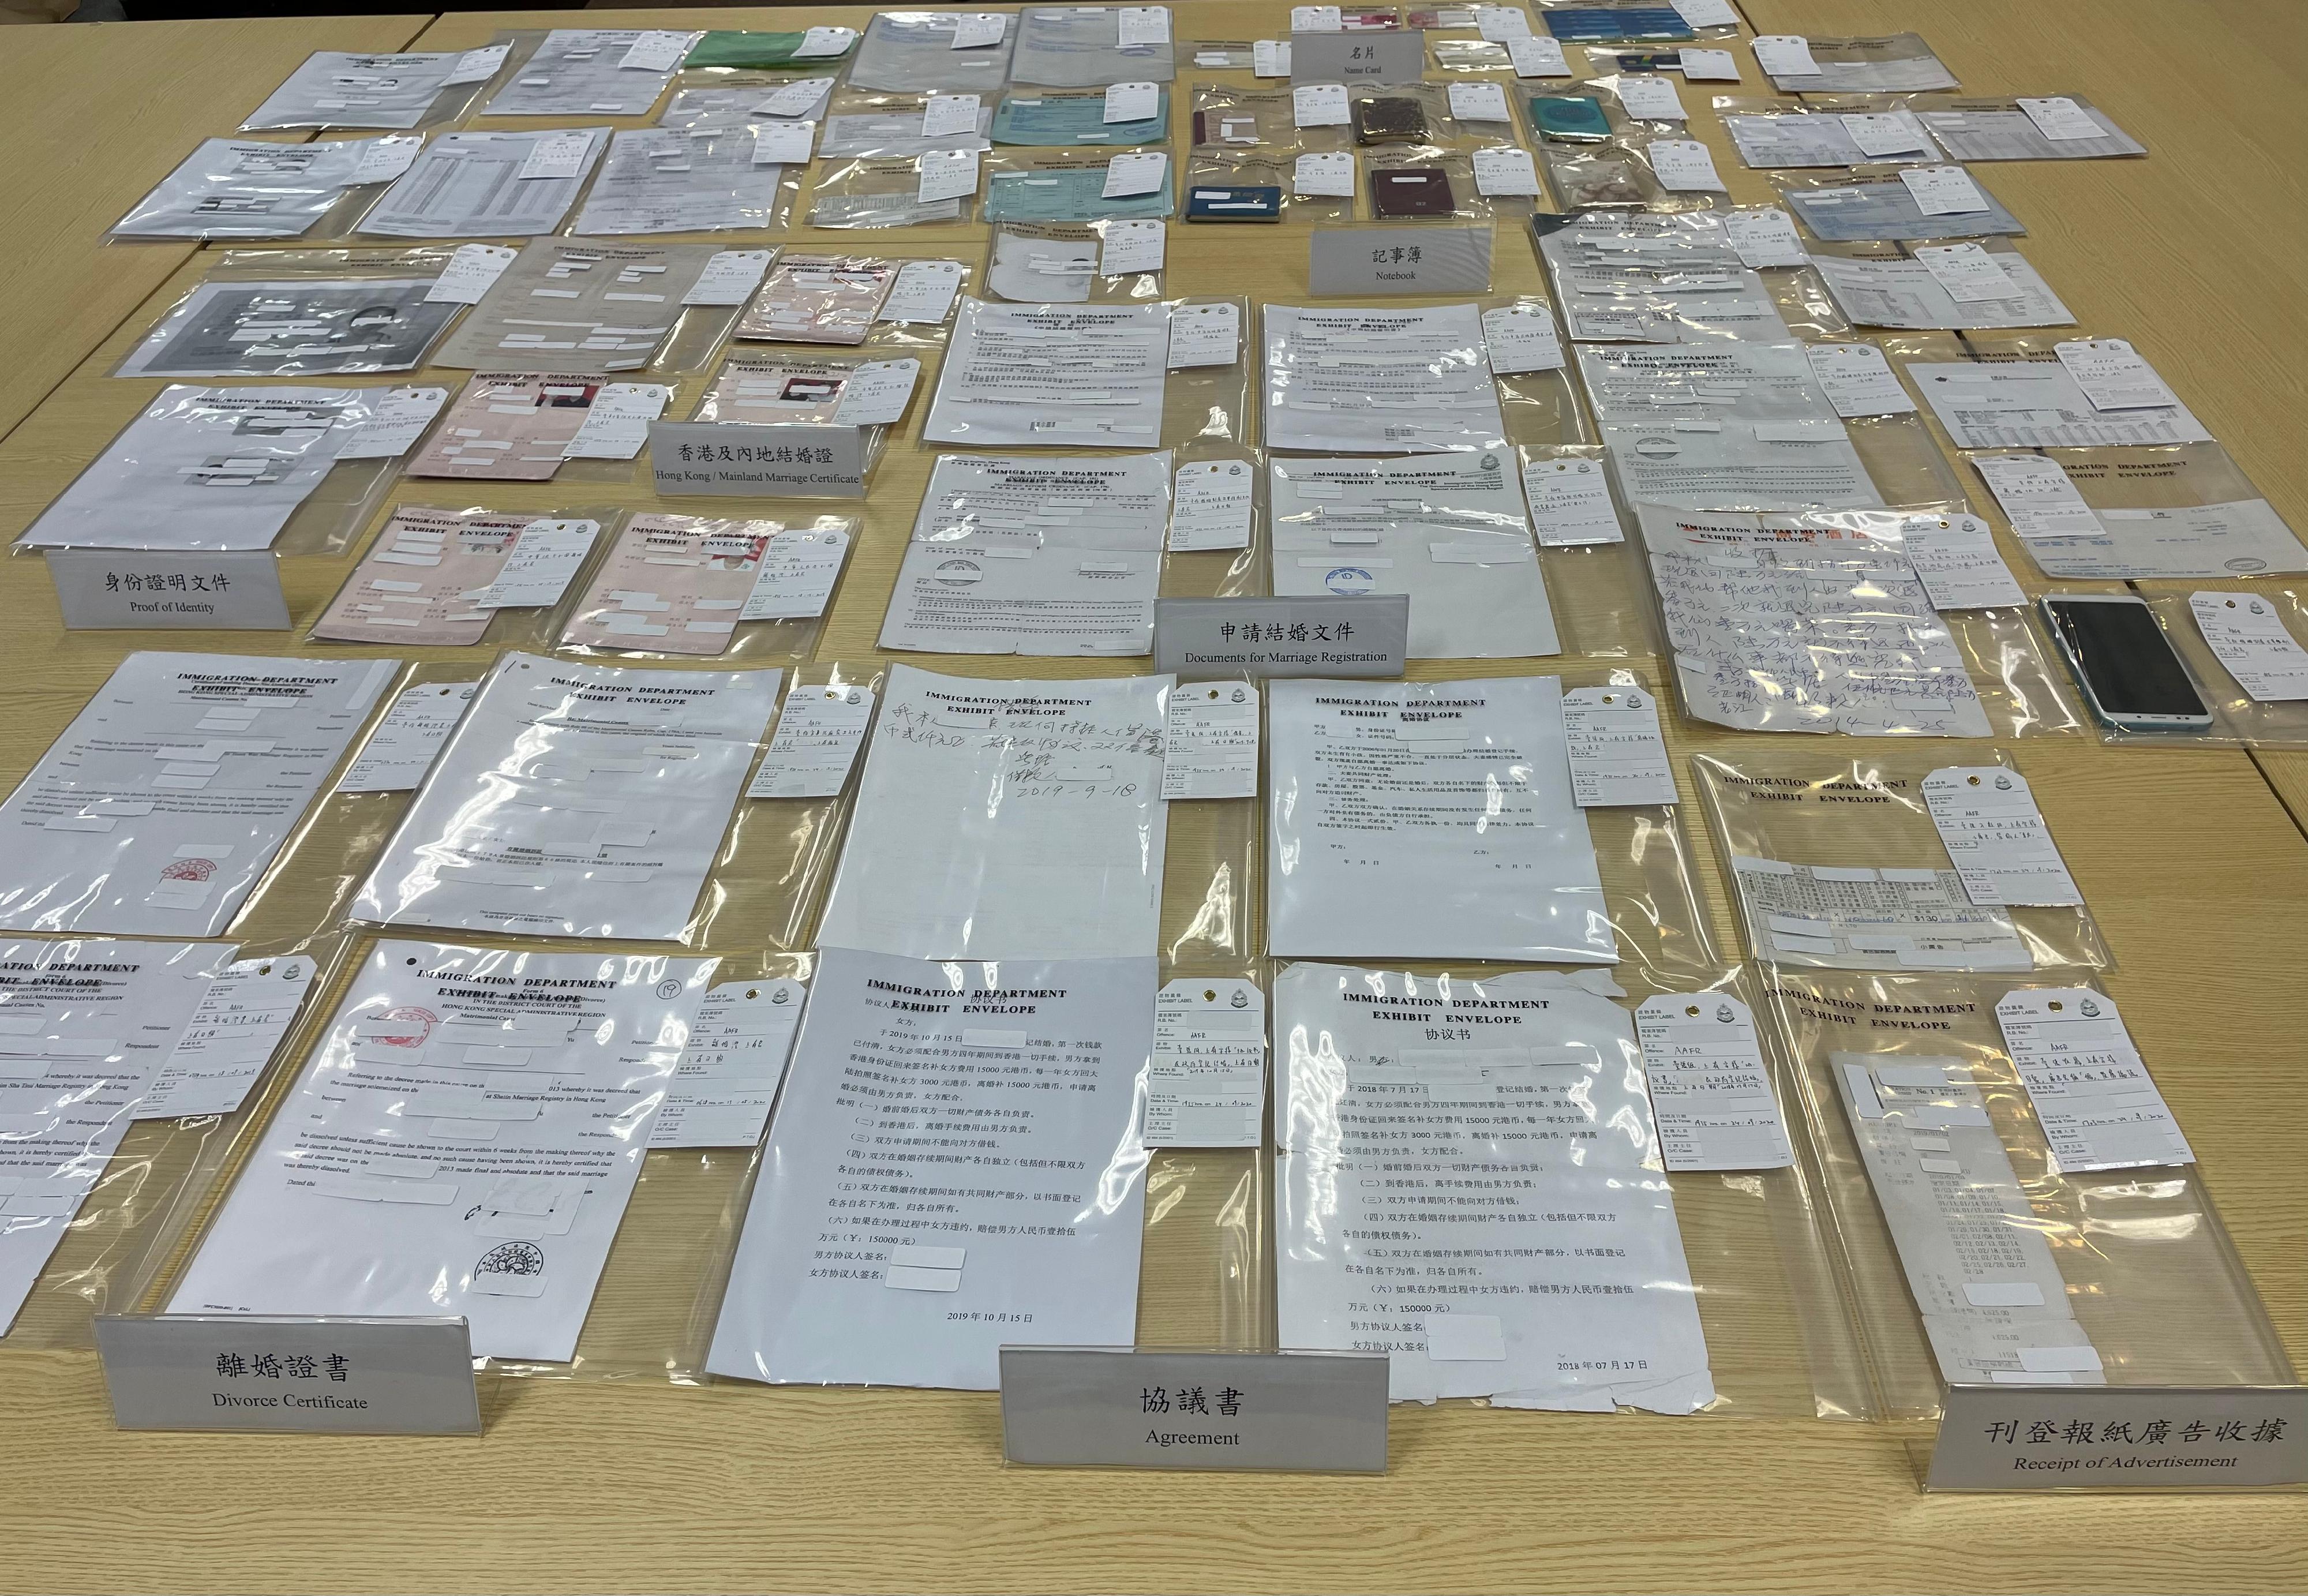 The Special Investigation Section of the Immigration Department launched an operation codenamed "Flashspear 2020" combatting bogus marriage activities. Photo shows exhibits seized during the operation.